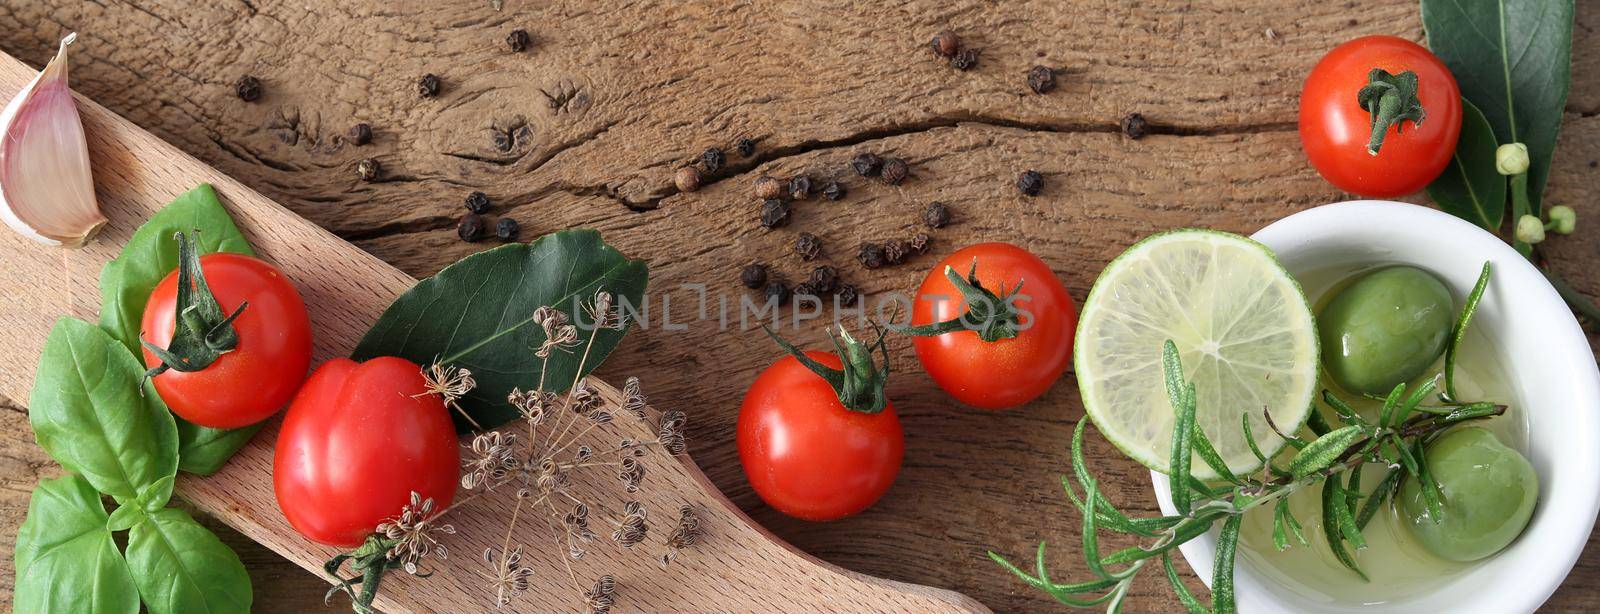 Italian Mediterranean cuisine with different vegetables, tomatoes, olive oil, spice, garlic on old wooden background. Fresh ingredients for pizza, pasta. Top view, place for text